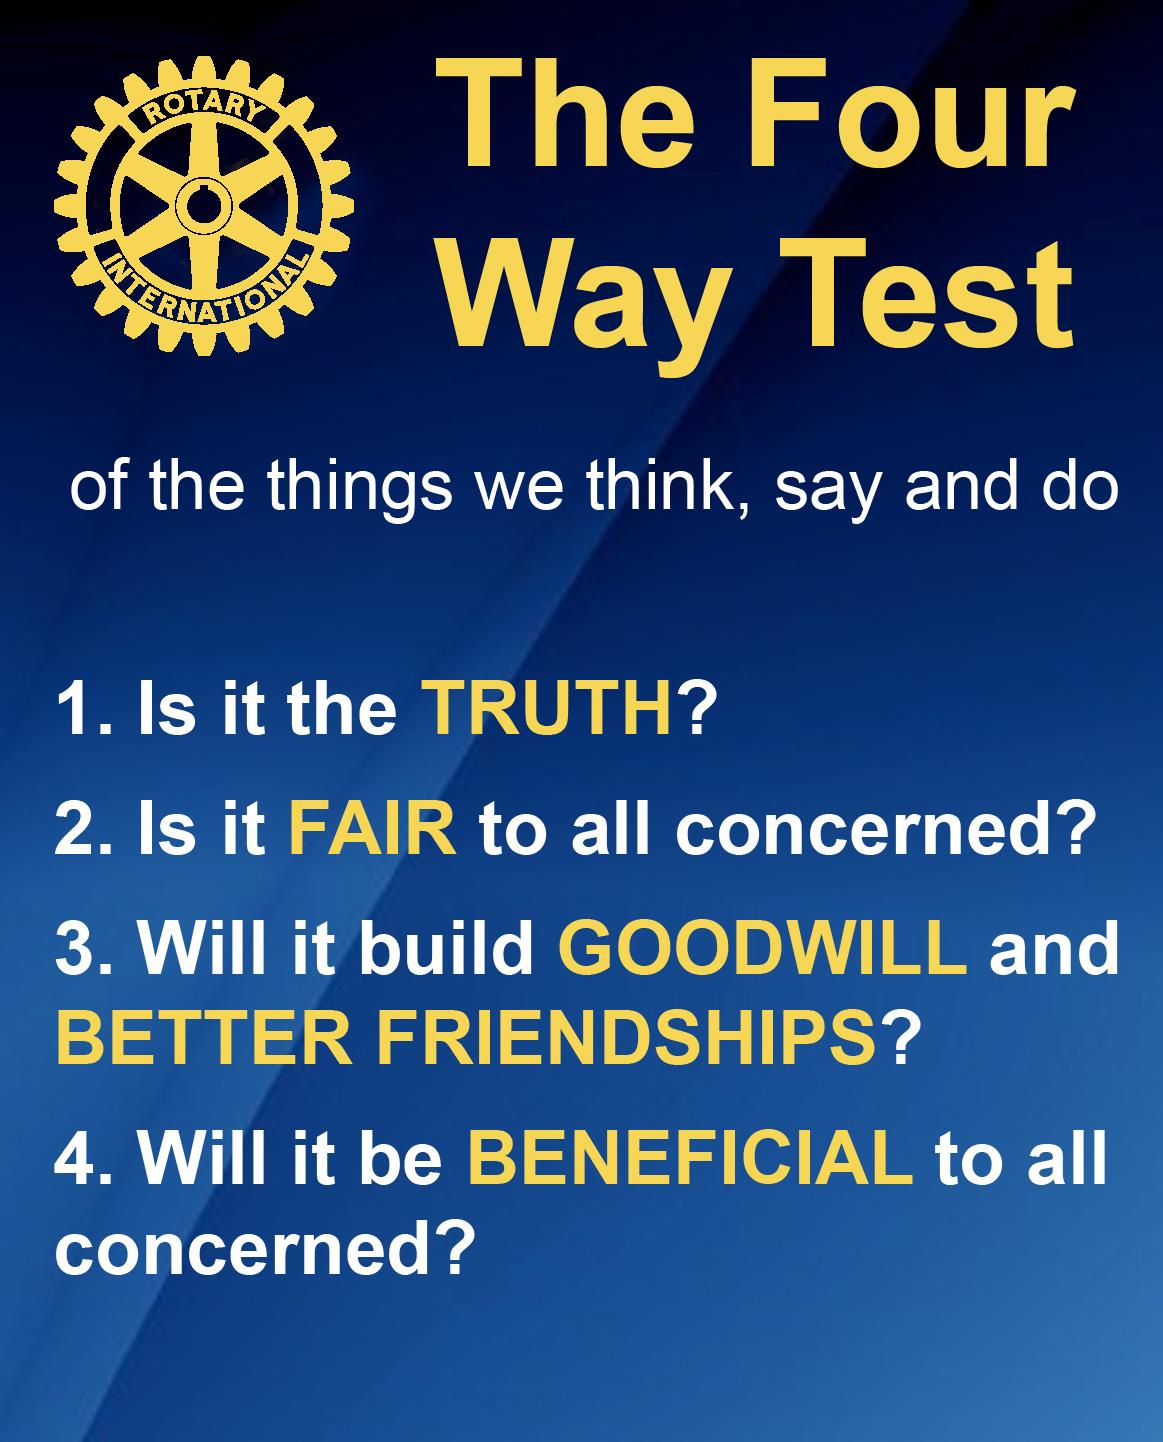 the rotary four way test essay